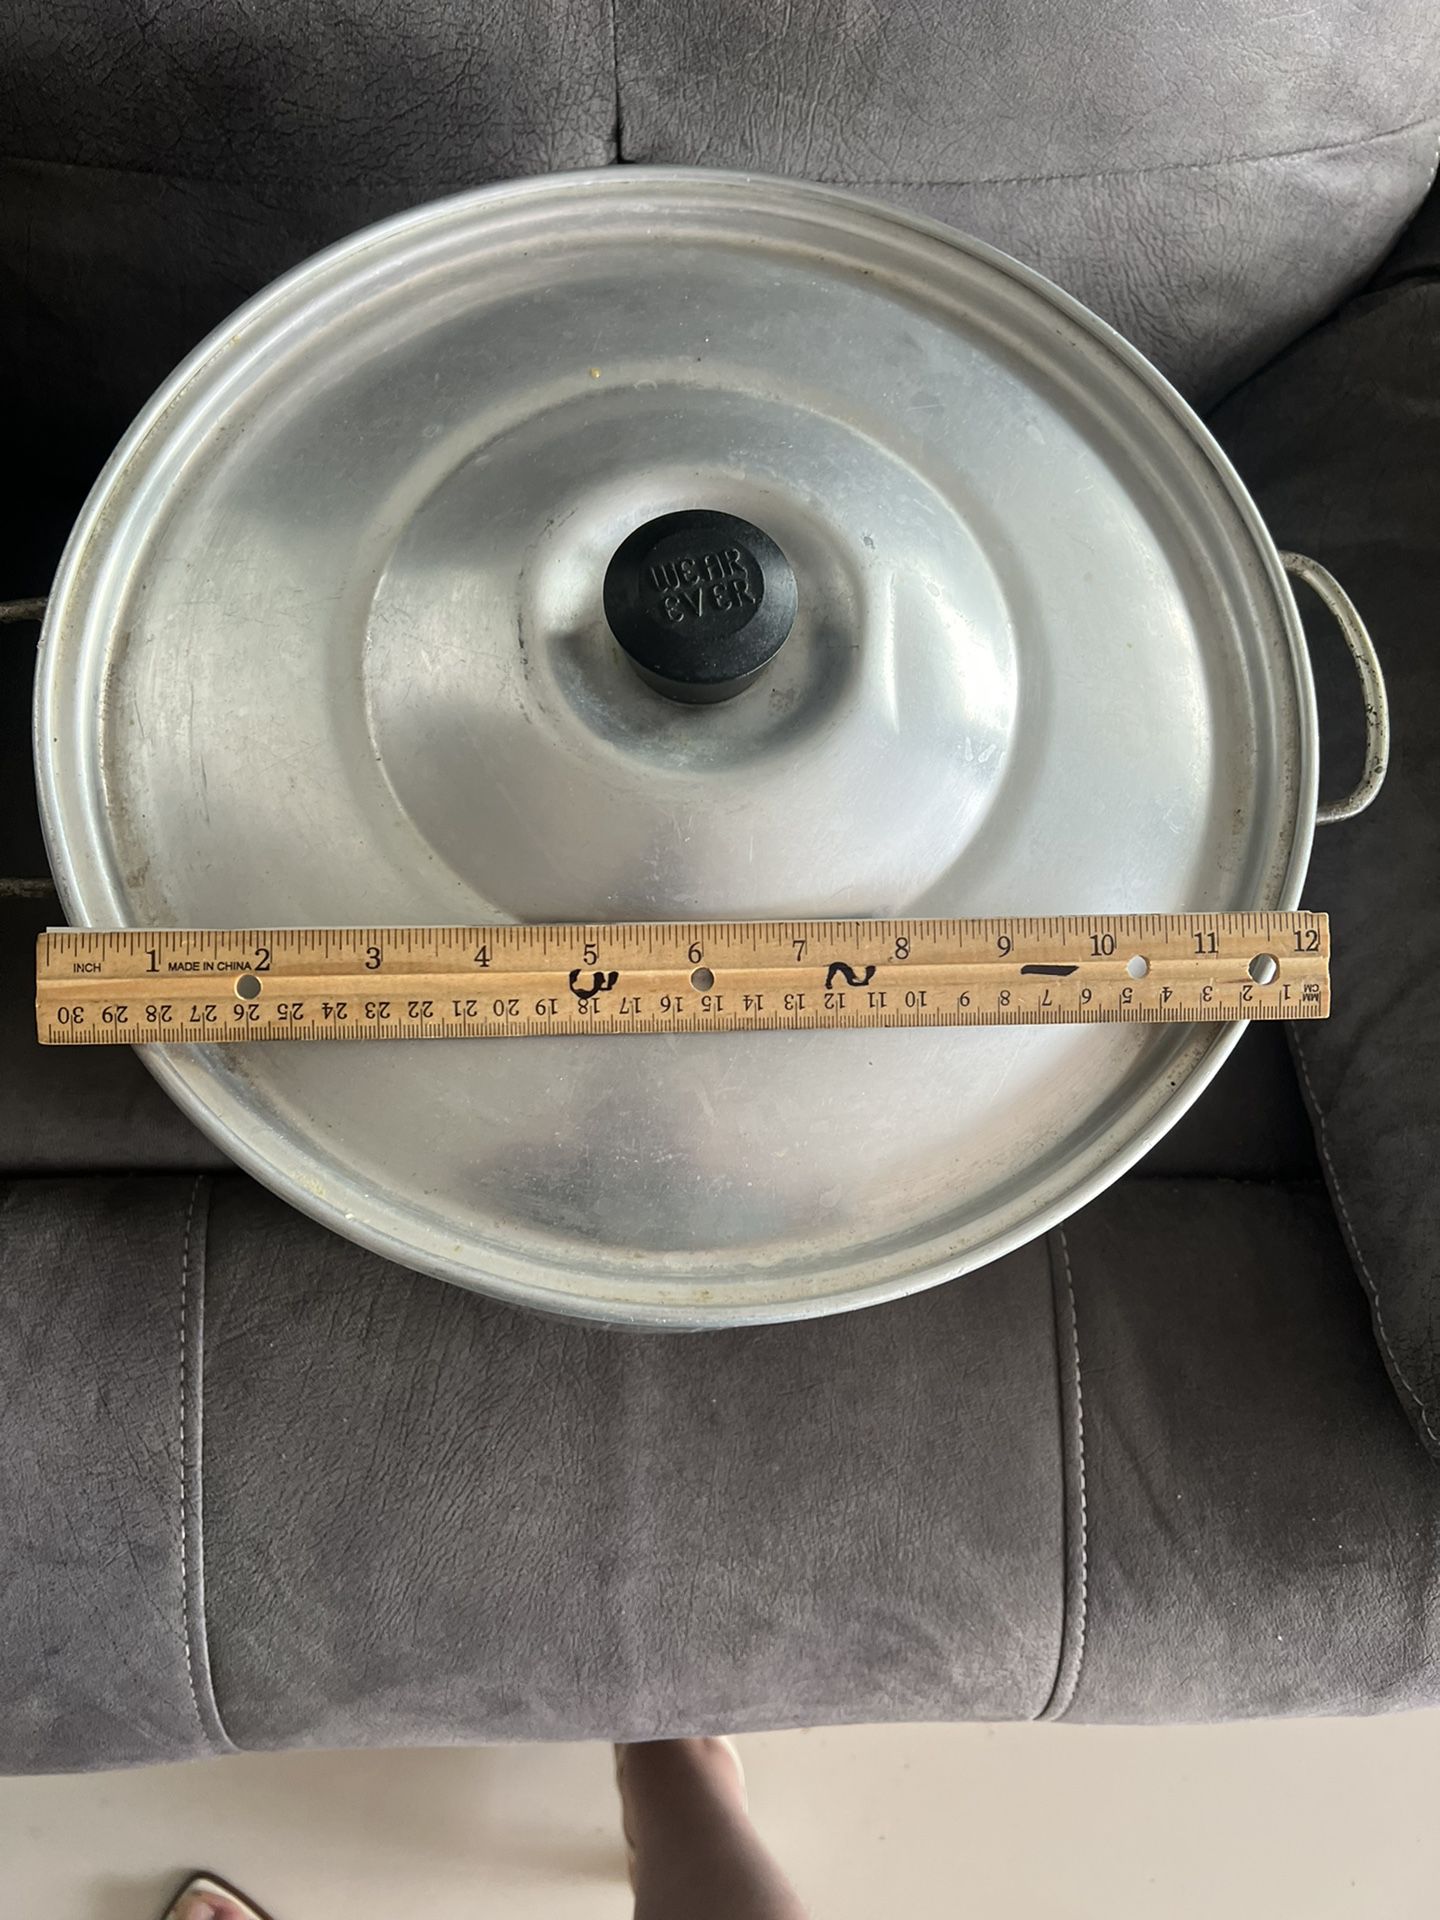 Vintage REGAL WARE 8 Qt. Cast Aluminum Non-Stick Dutch Oven / Stock Pot  With Lid. for Sale in Edgewood, WA - OfferUp